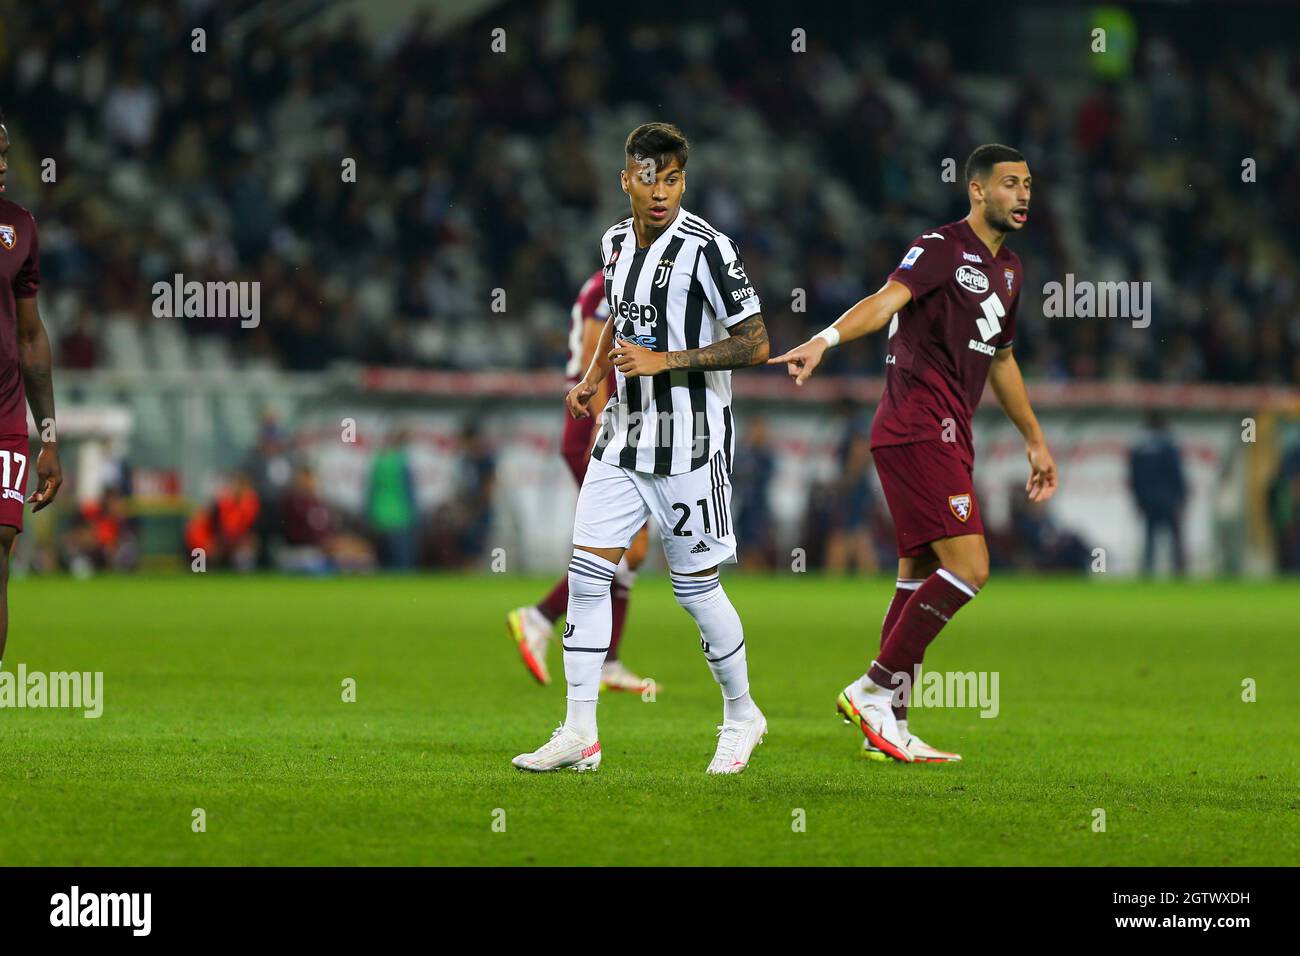 TURIN, ITALY. 02 OCTOBER 2021. Kaio Jorge of Juventus FC during the Serie A match between Torino FC and Juventus FC on 23 September 2021 at Olympic Grande Torino Stadium. Credit: Massimiliano Ferraro/Medialys Images/Alamy Live News Stock Photo